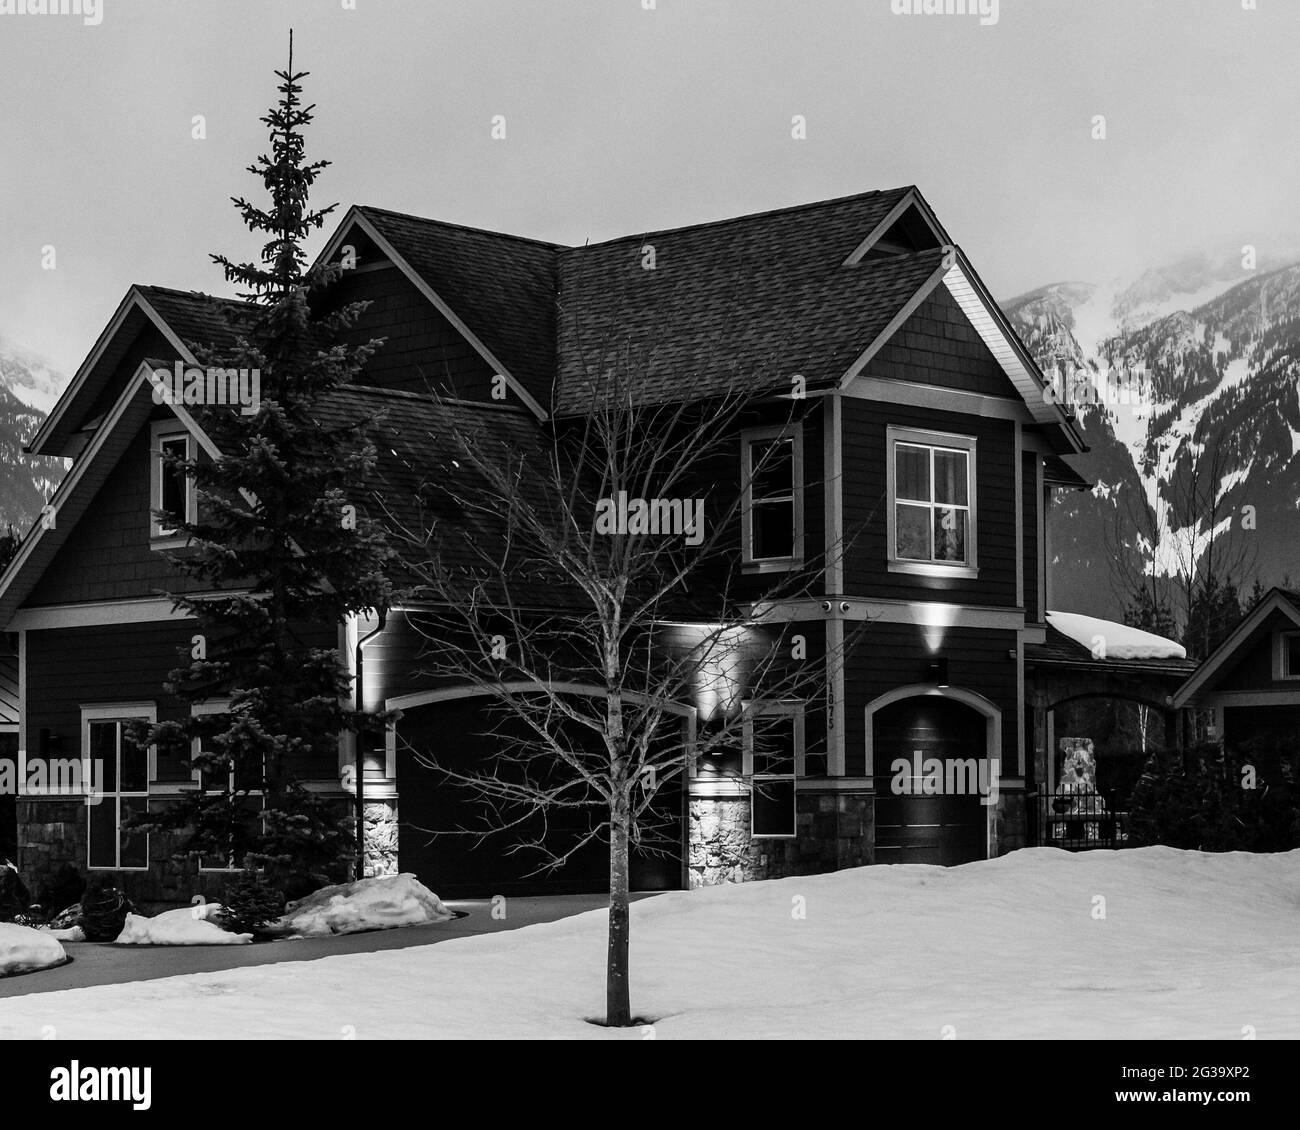 REVELSTOKE, CANADA - MARCH 14, 2021: black and white private home in small town evening time early spring with snow Stock Photo